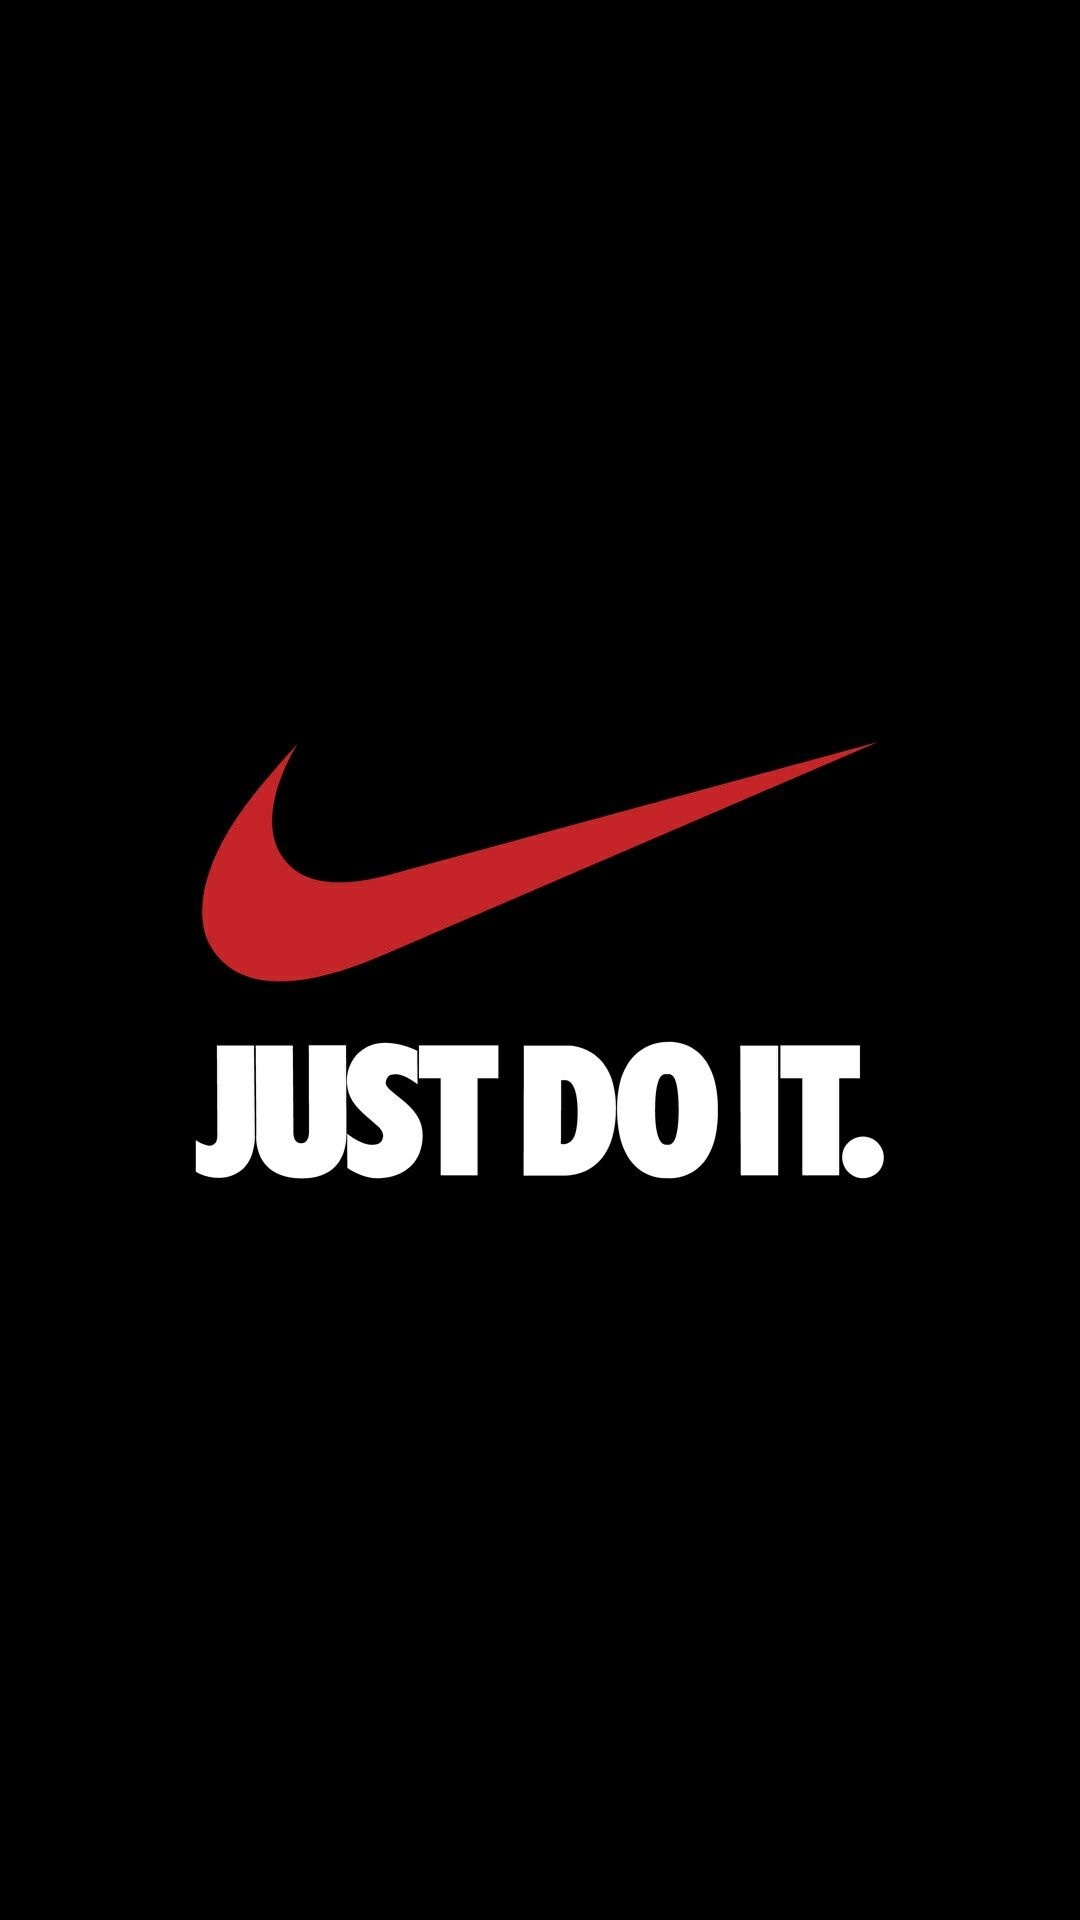 Just Do It Nike logo, Motivational wallpapers, Nike brand, Background images, 1080x1920 Full HD Handy